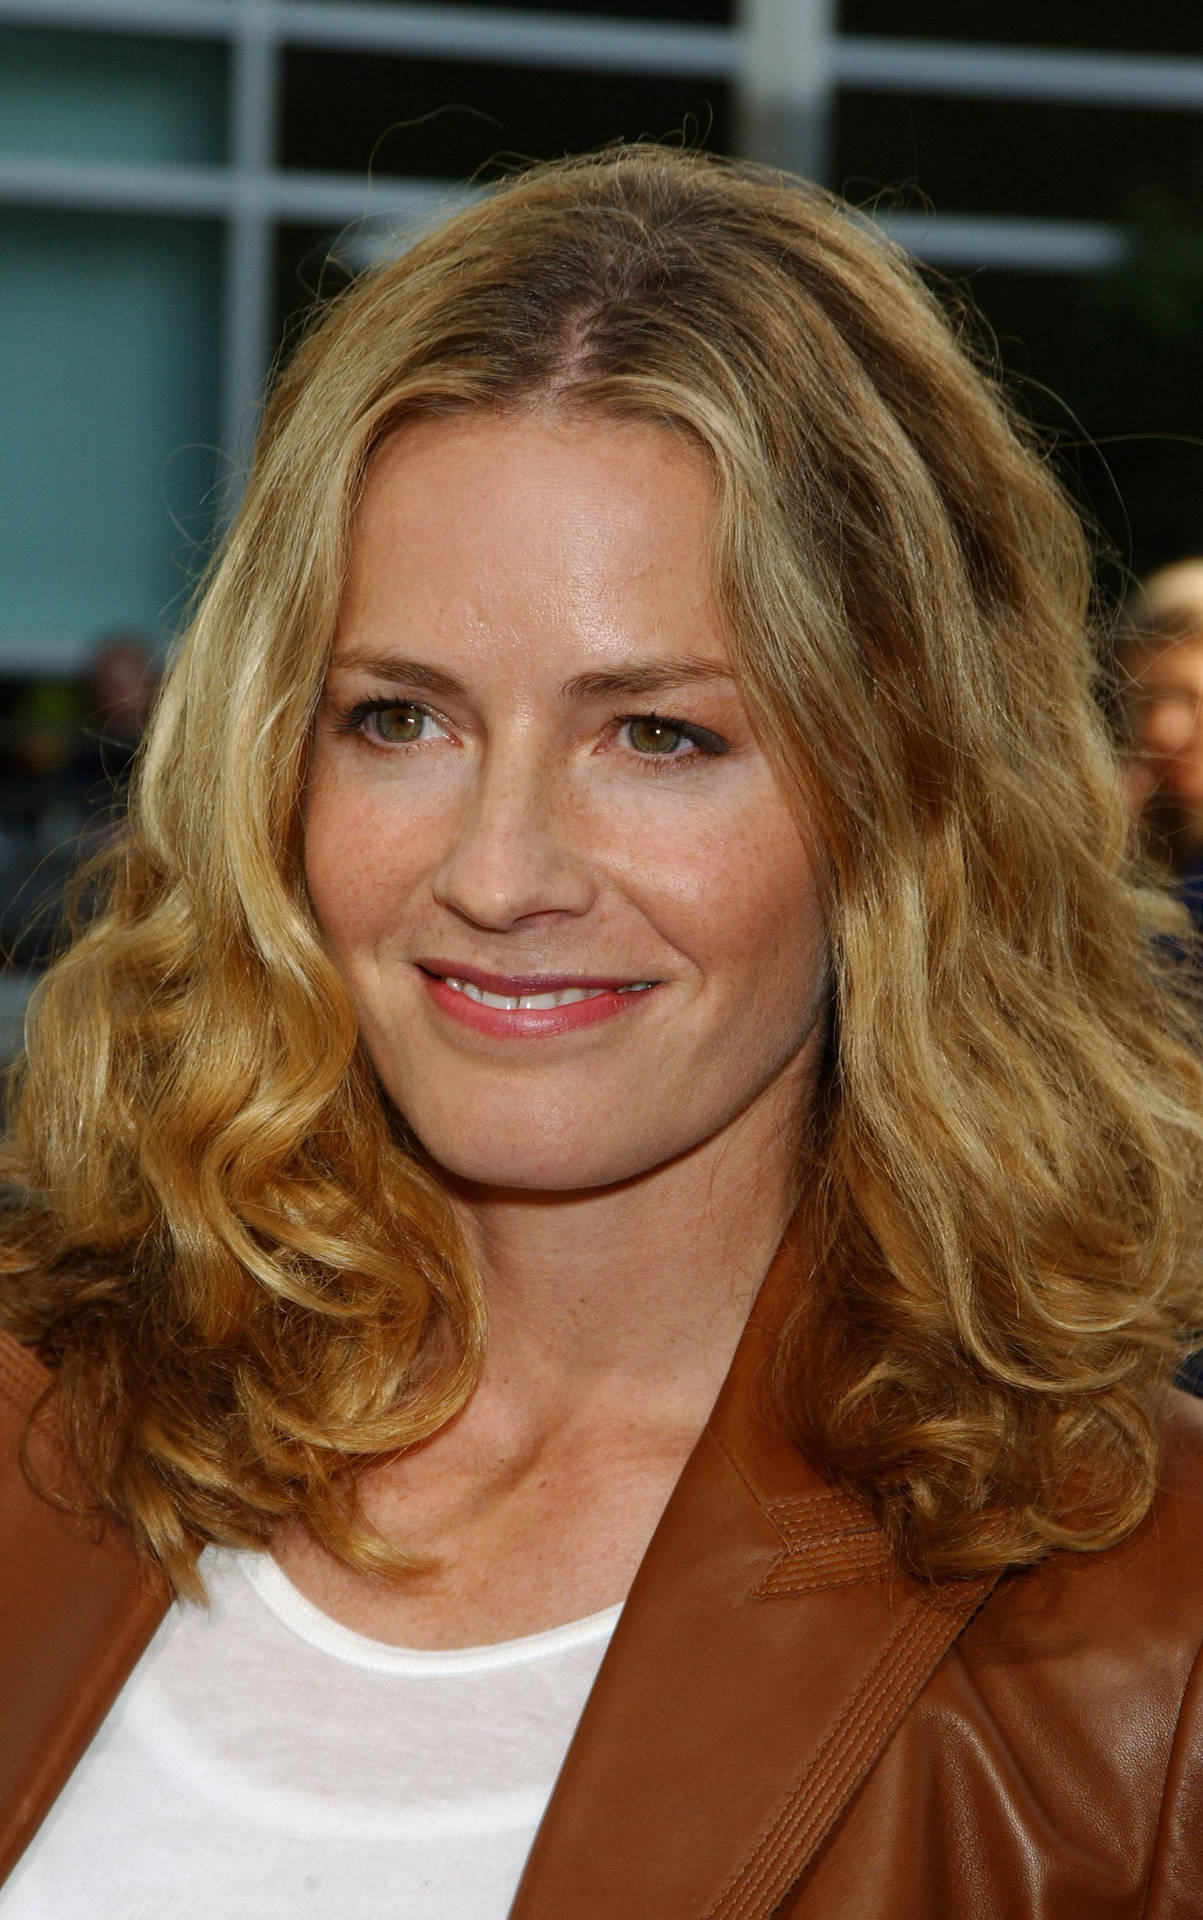 Download Close Up View Of Elisabeth Shue Smiling Looking To The Right  Wallpaper 